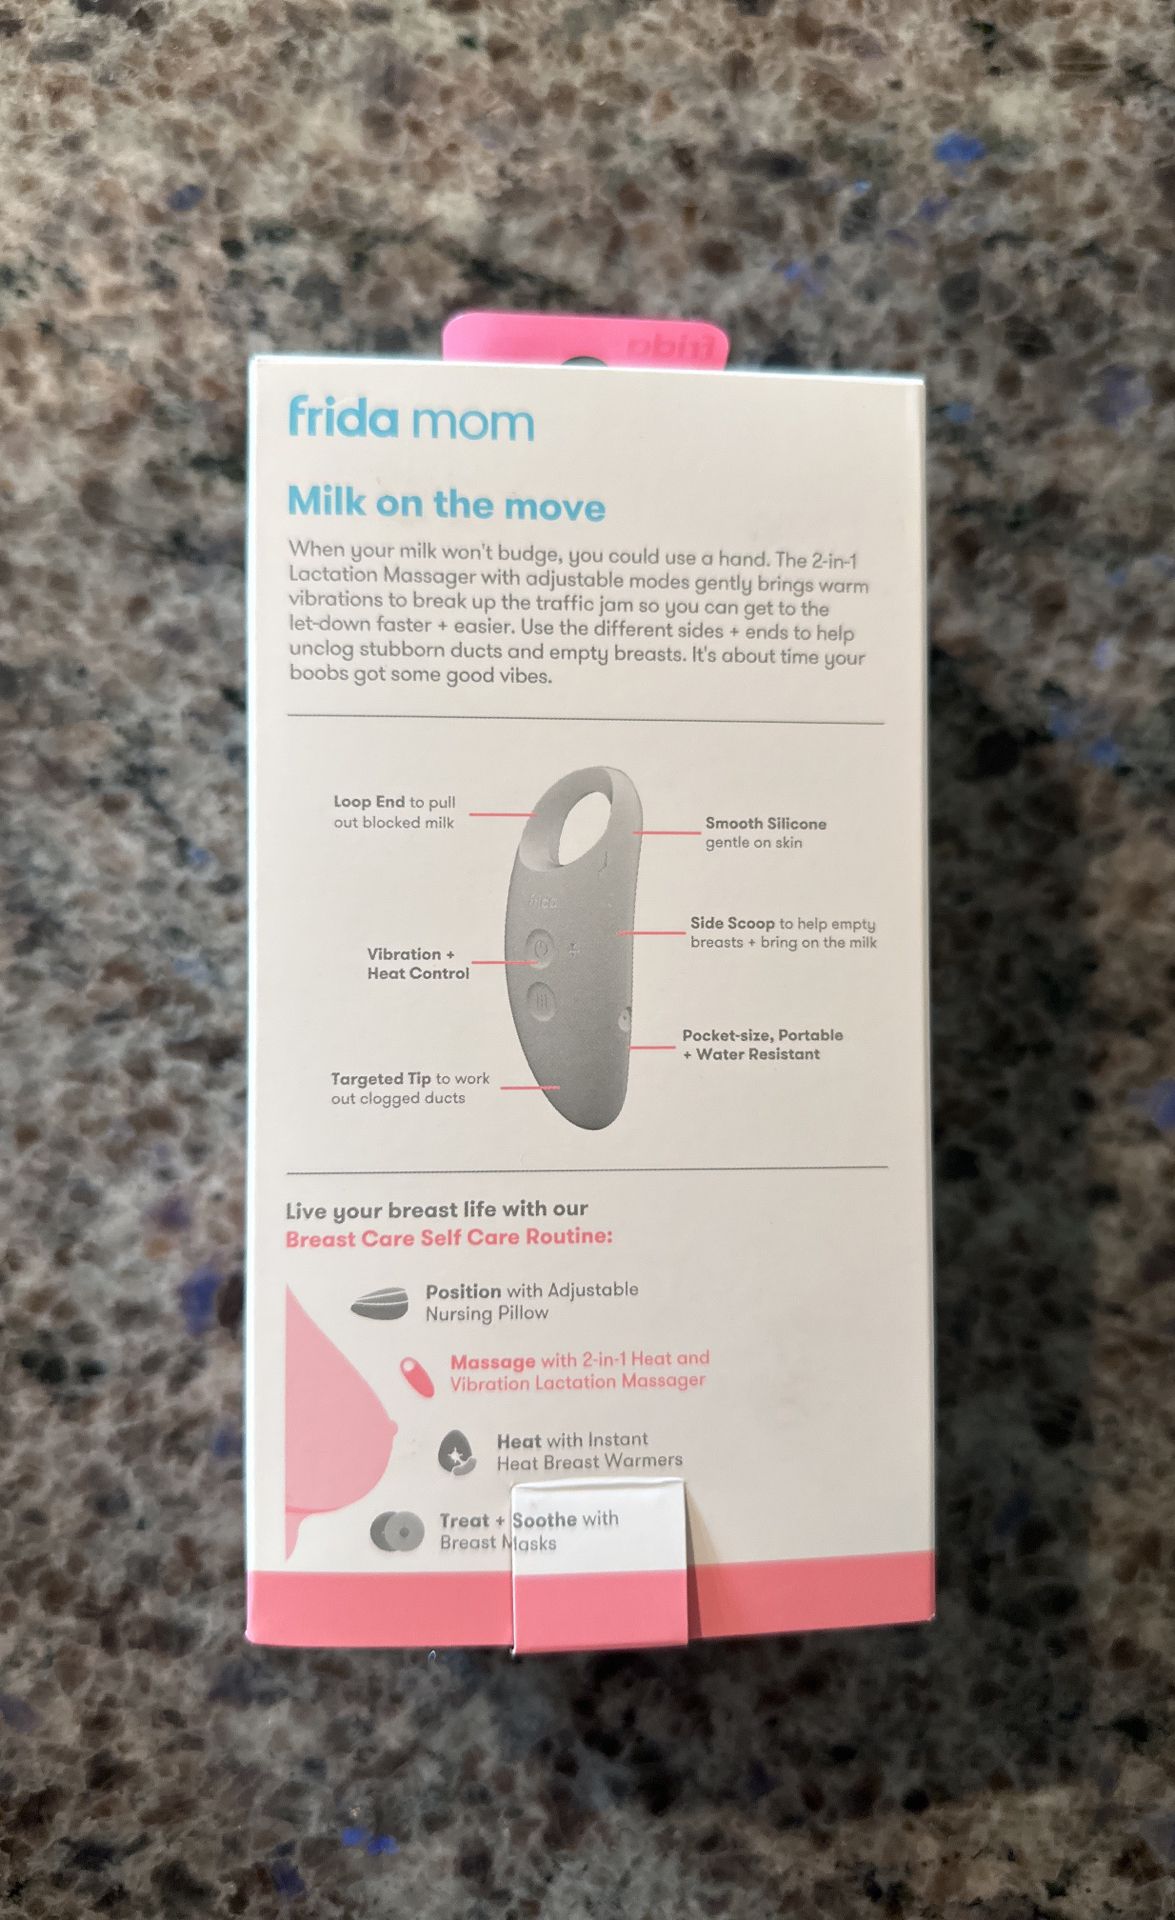 Frida Mom Lactation Massager for Sale in Placentia, CA - OfferUp